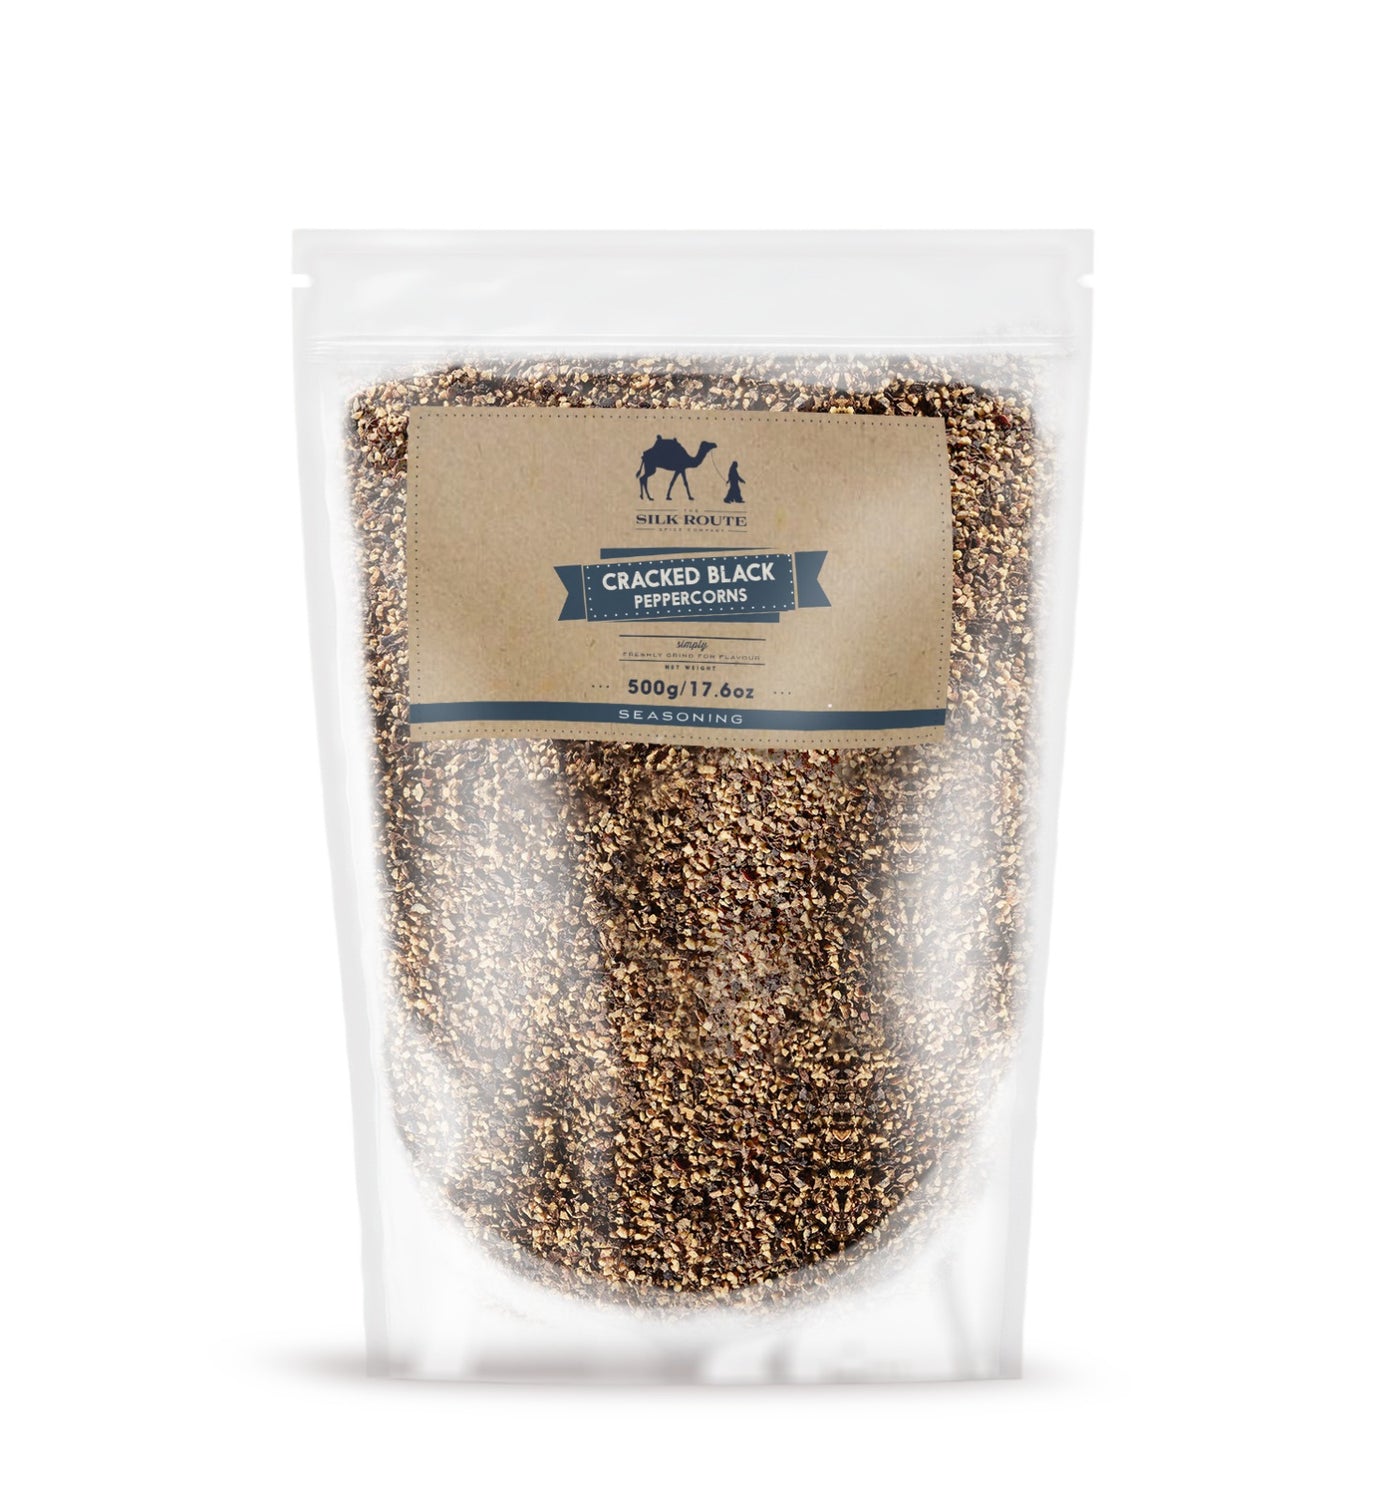 Resealable Cracked Black Peppercorn Pouch - 500g